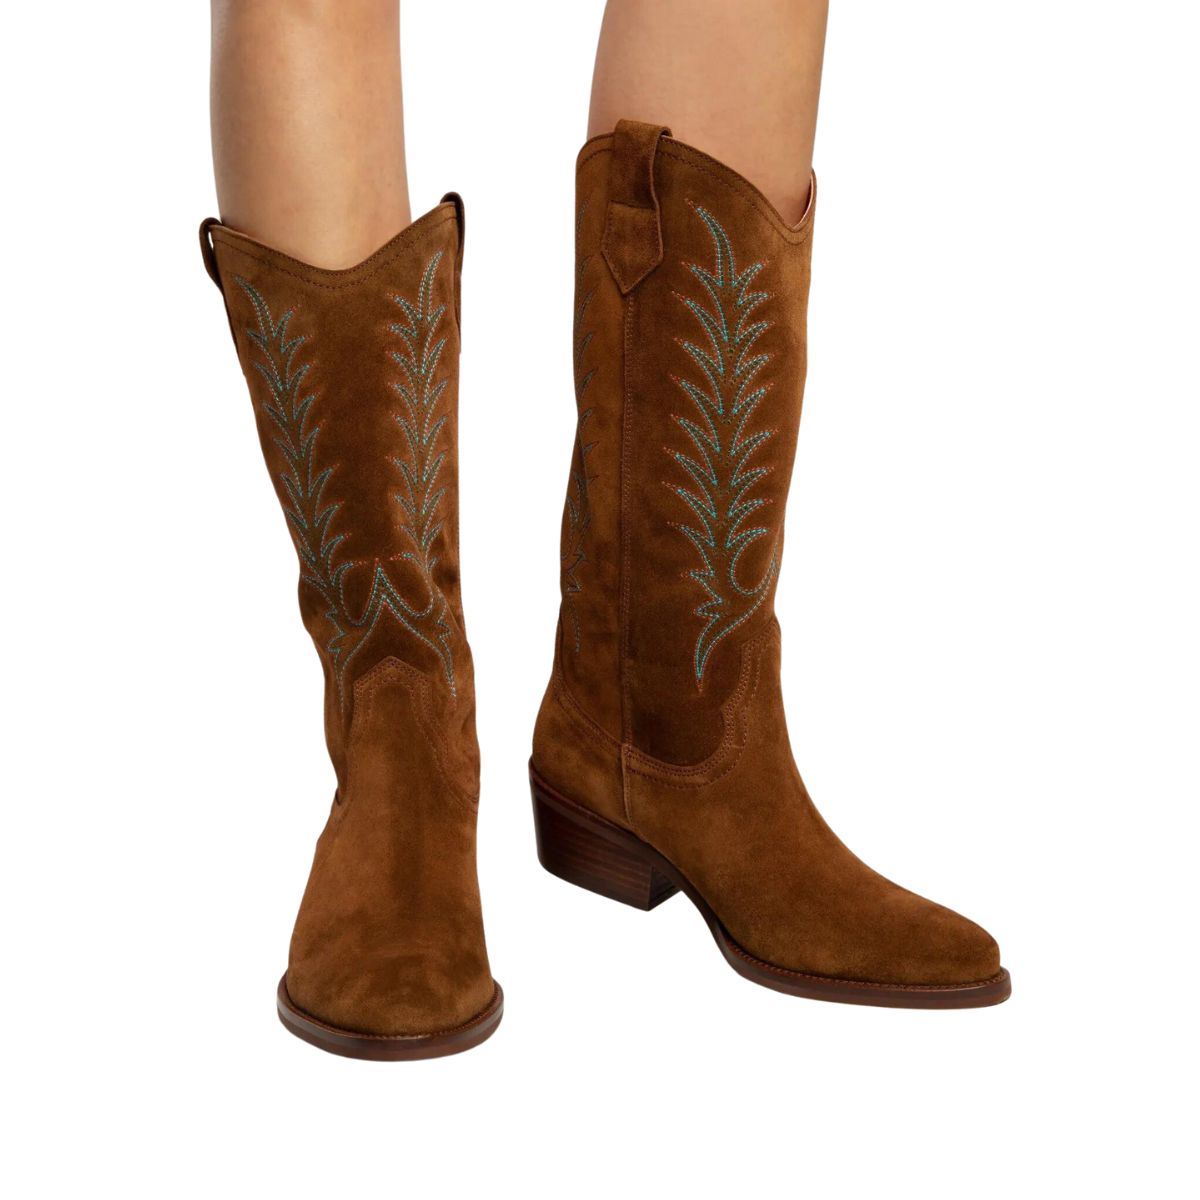 Penelope Chilvers Goldie Embroidered Cowboy Boot in Peat